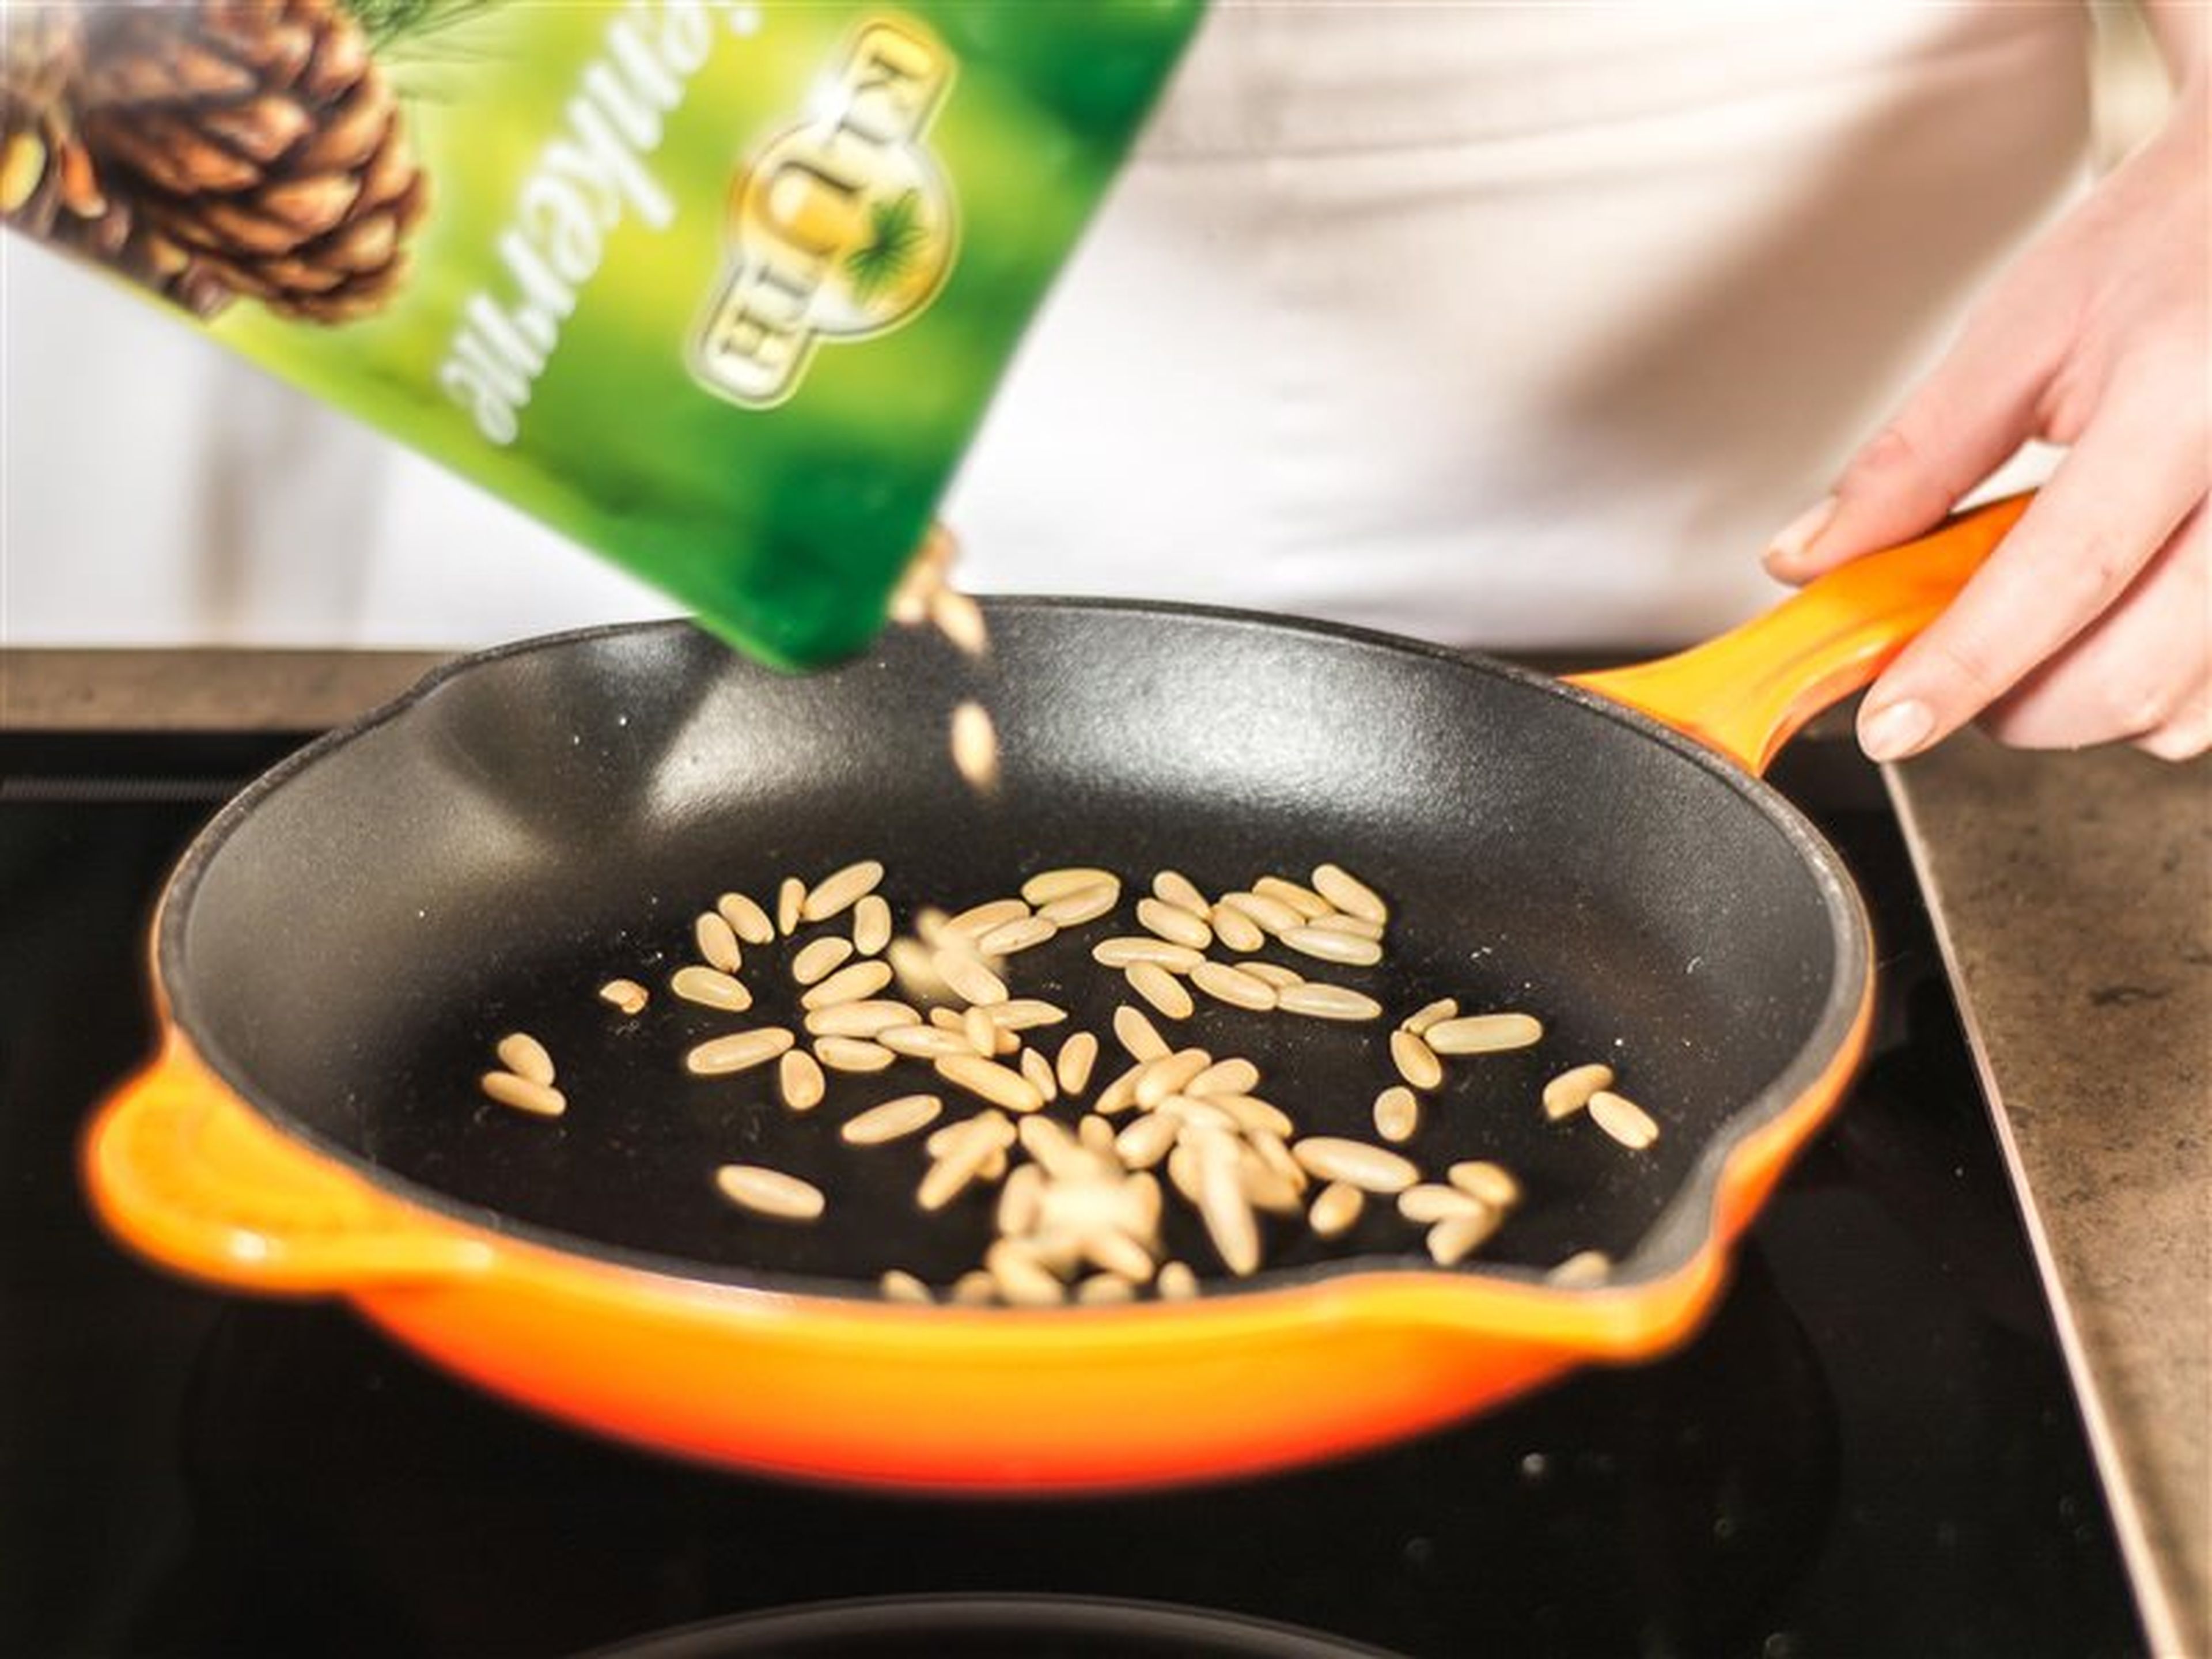 In the meantime, spread pine nuts in a dry frying pan and toast over medium-low heat until golden.